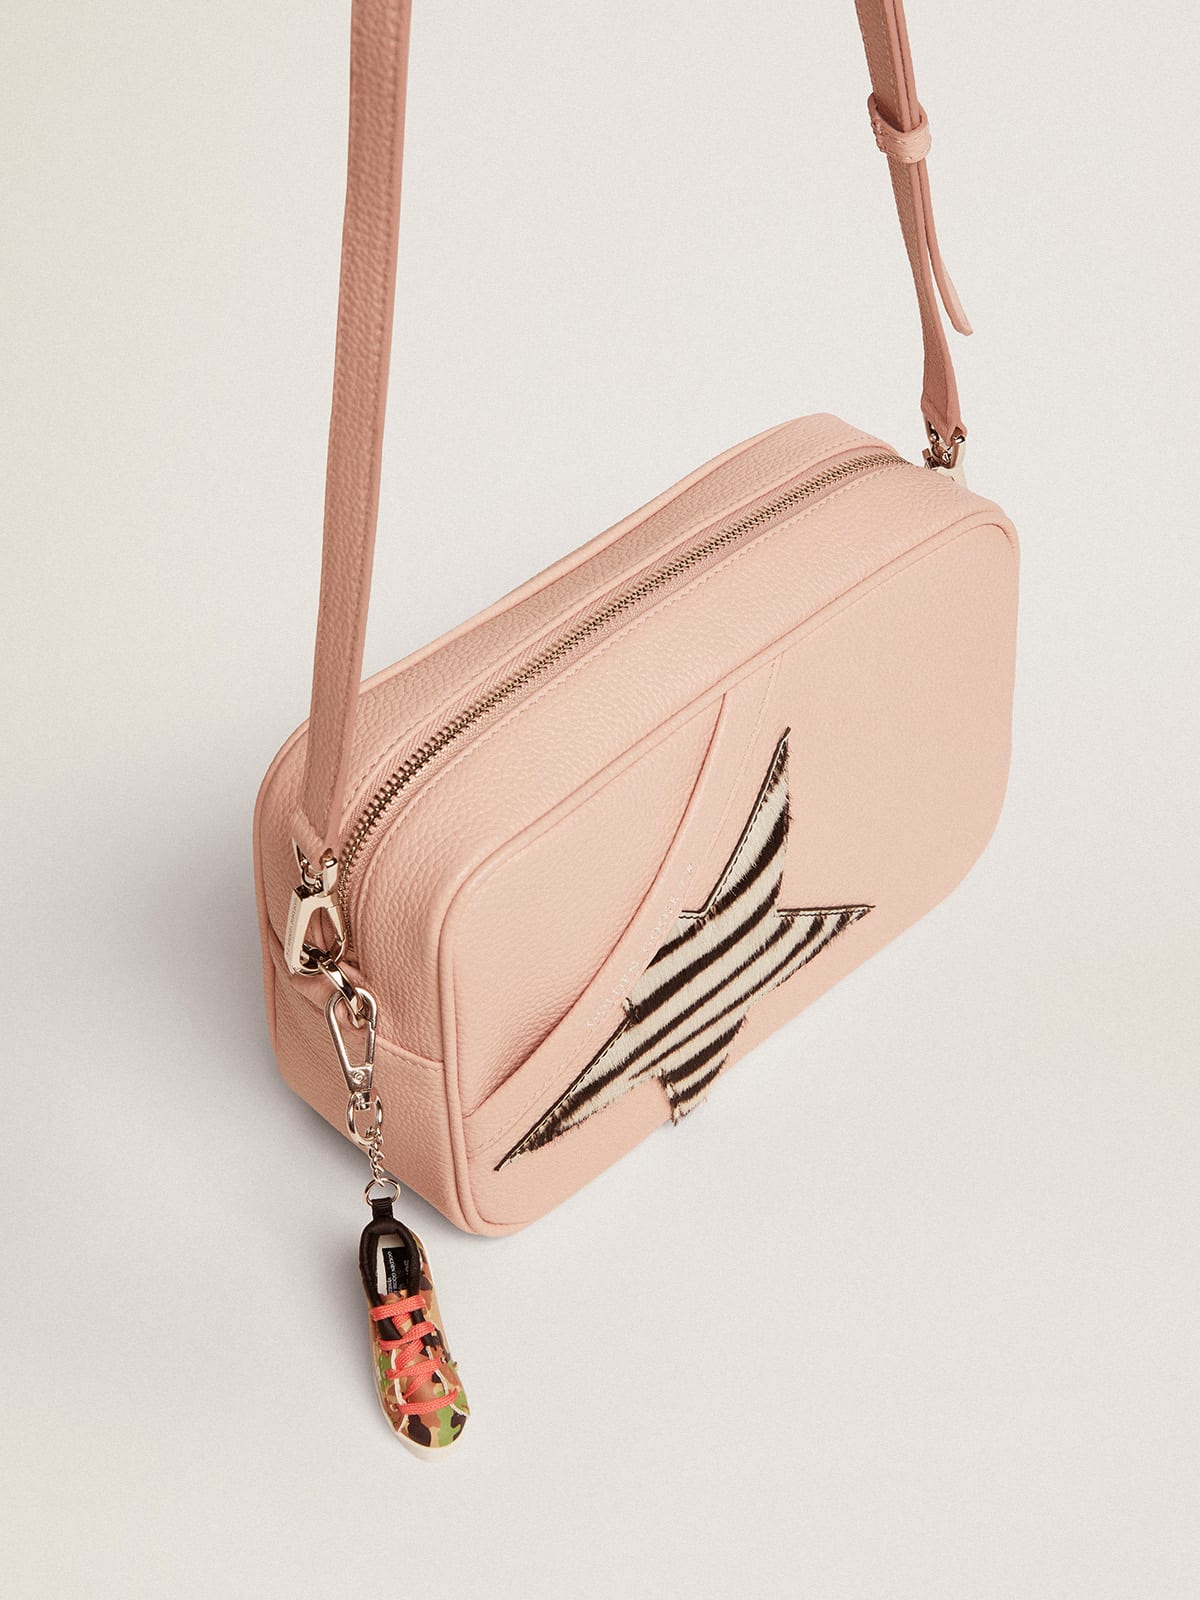 Golden Goose - Women's Star Bag in pink leather with zebra print pony skin star in 